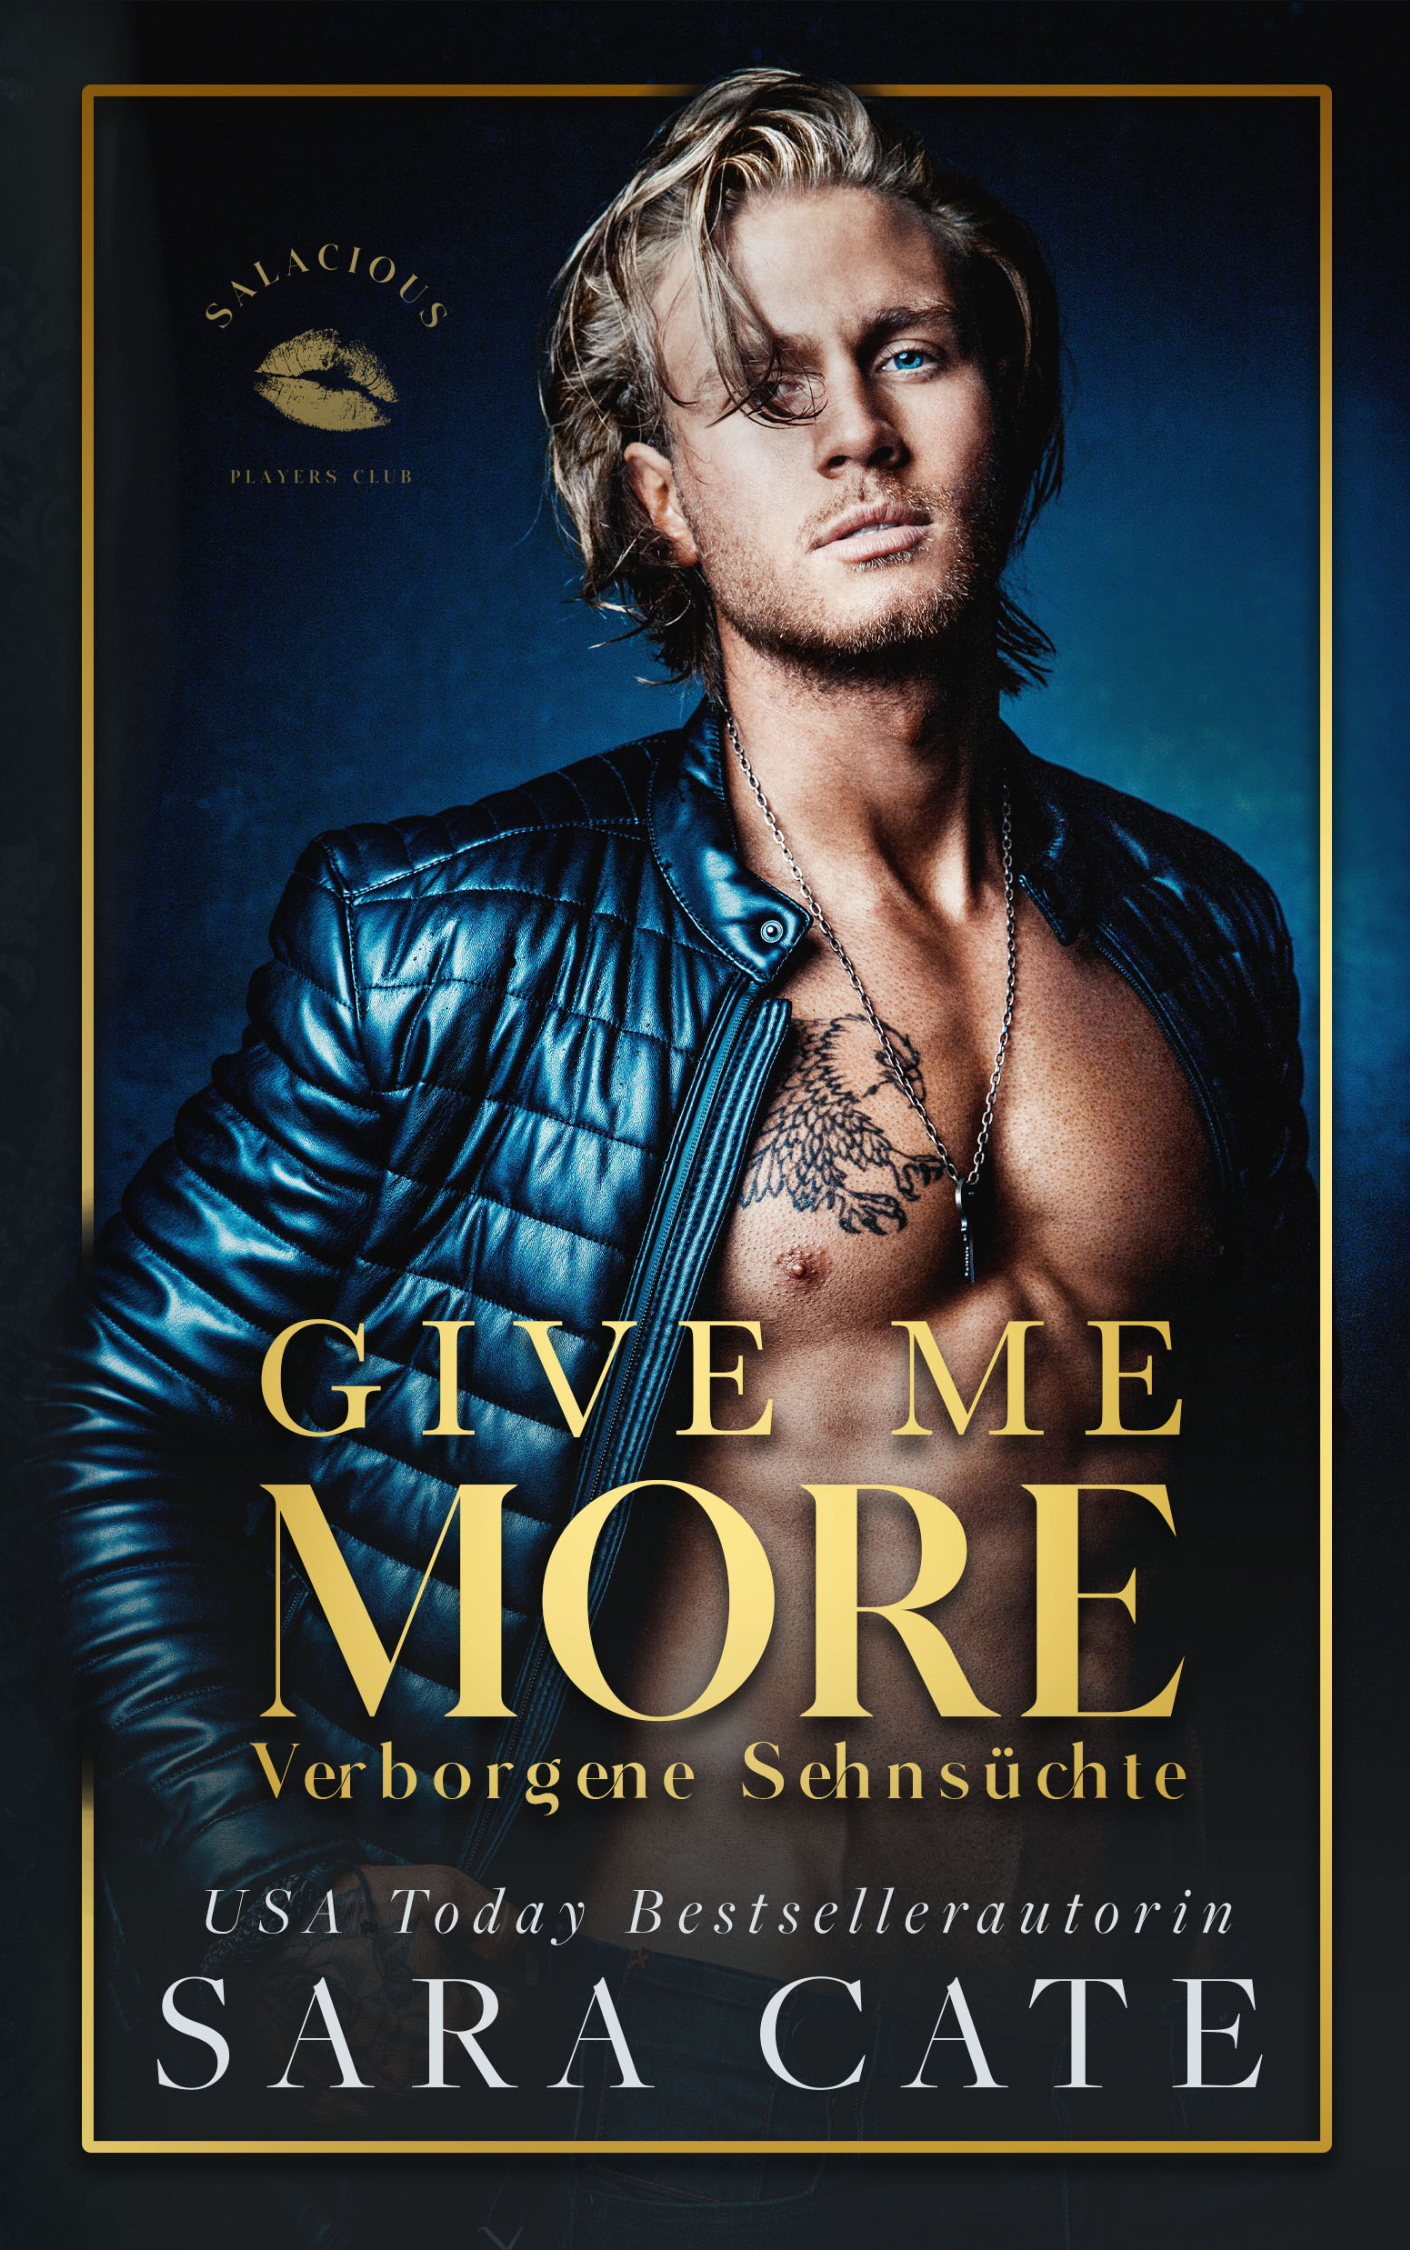 Give Me More: Verborgene Sehnsüchte (Salacious Players' Club 3)